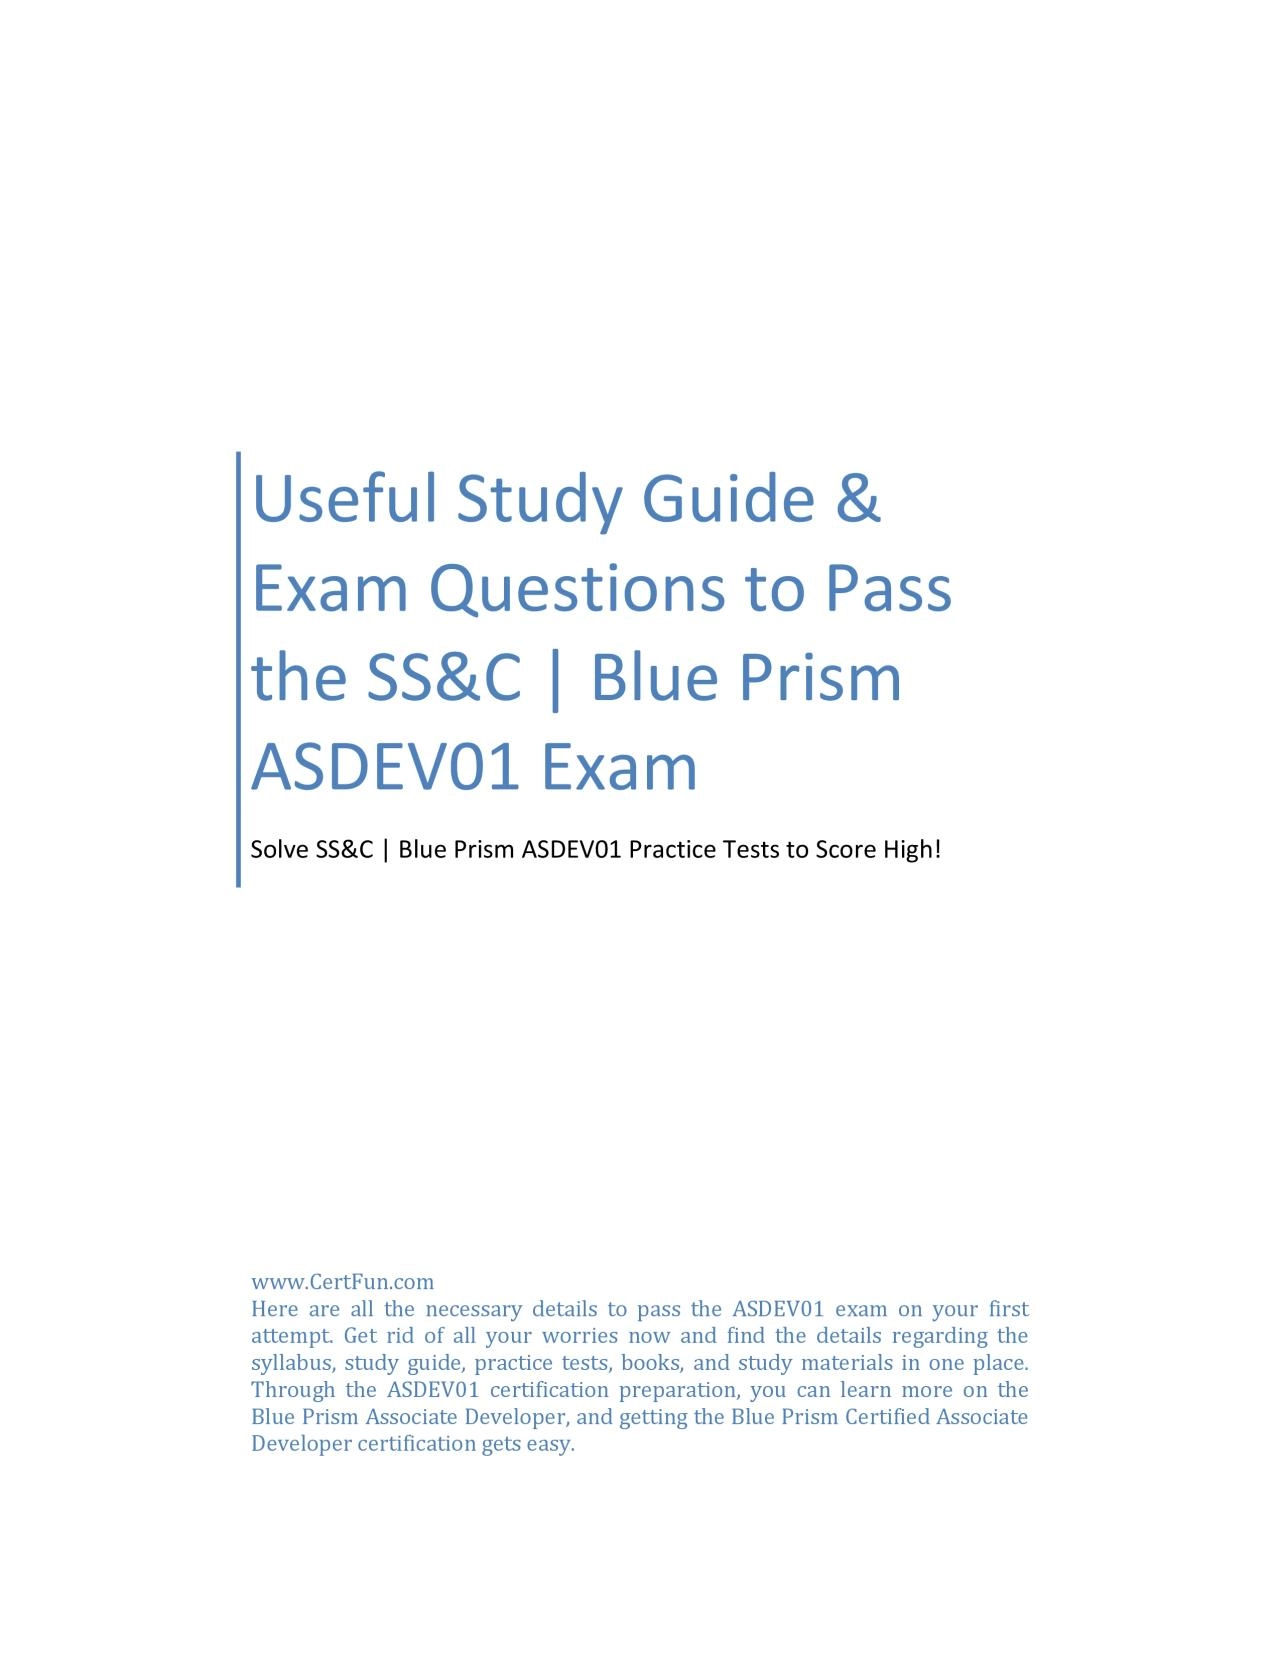 Useful Study Guide & Exam Questions to Pass the SS&C | Blue Prism ASDEV01 Exam